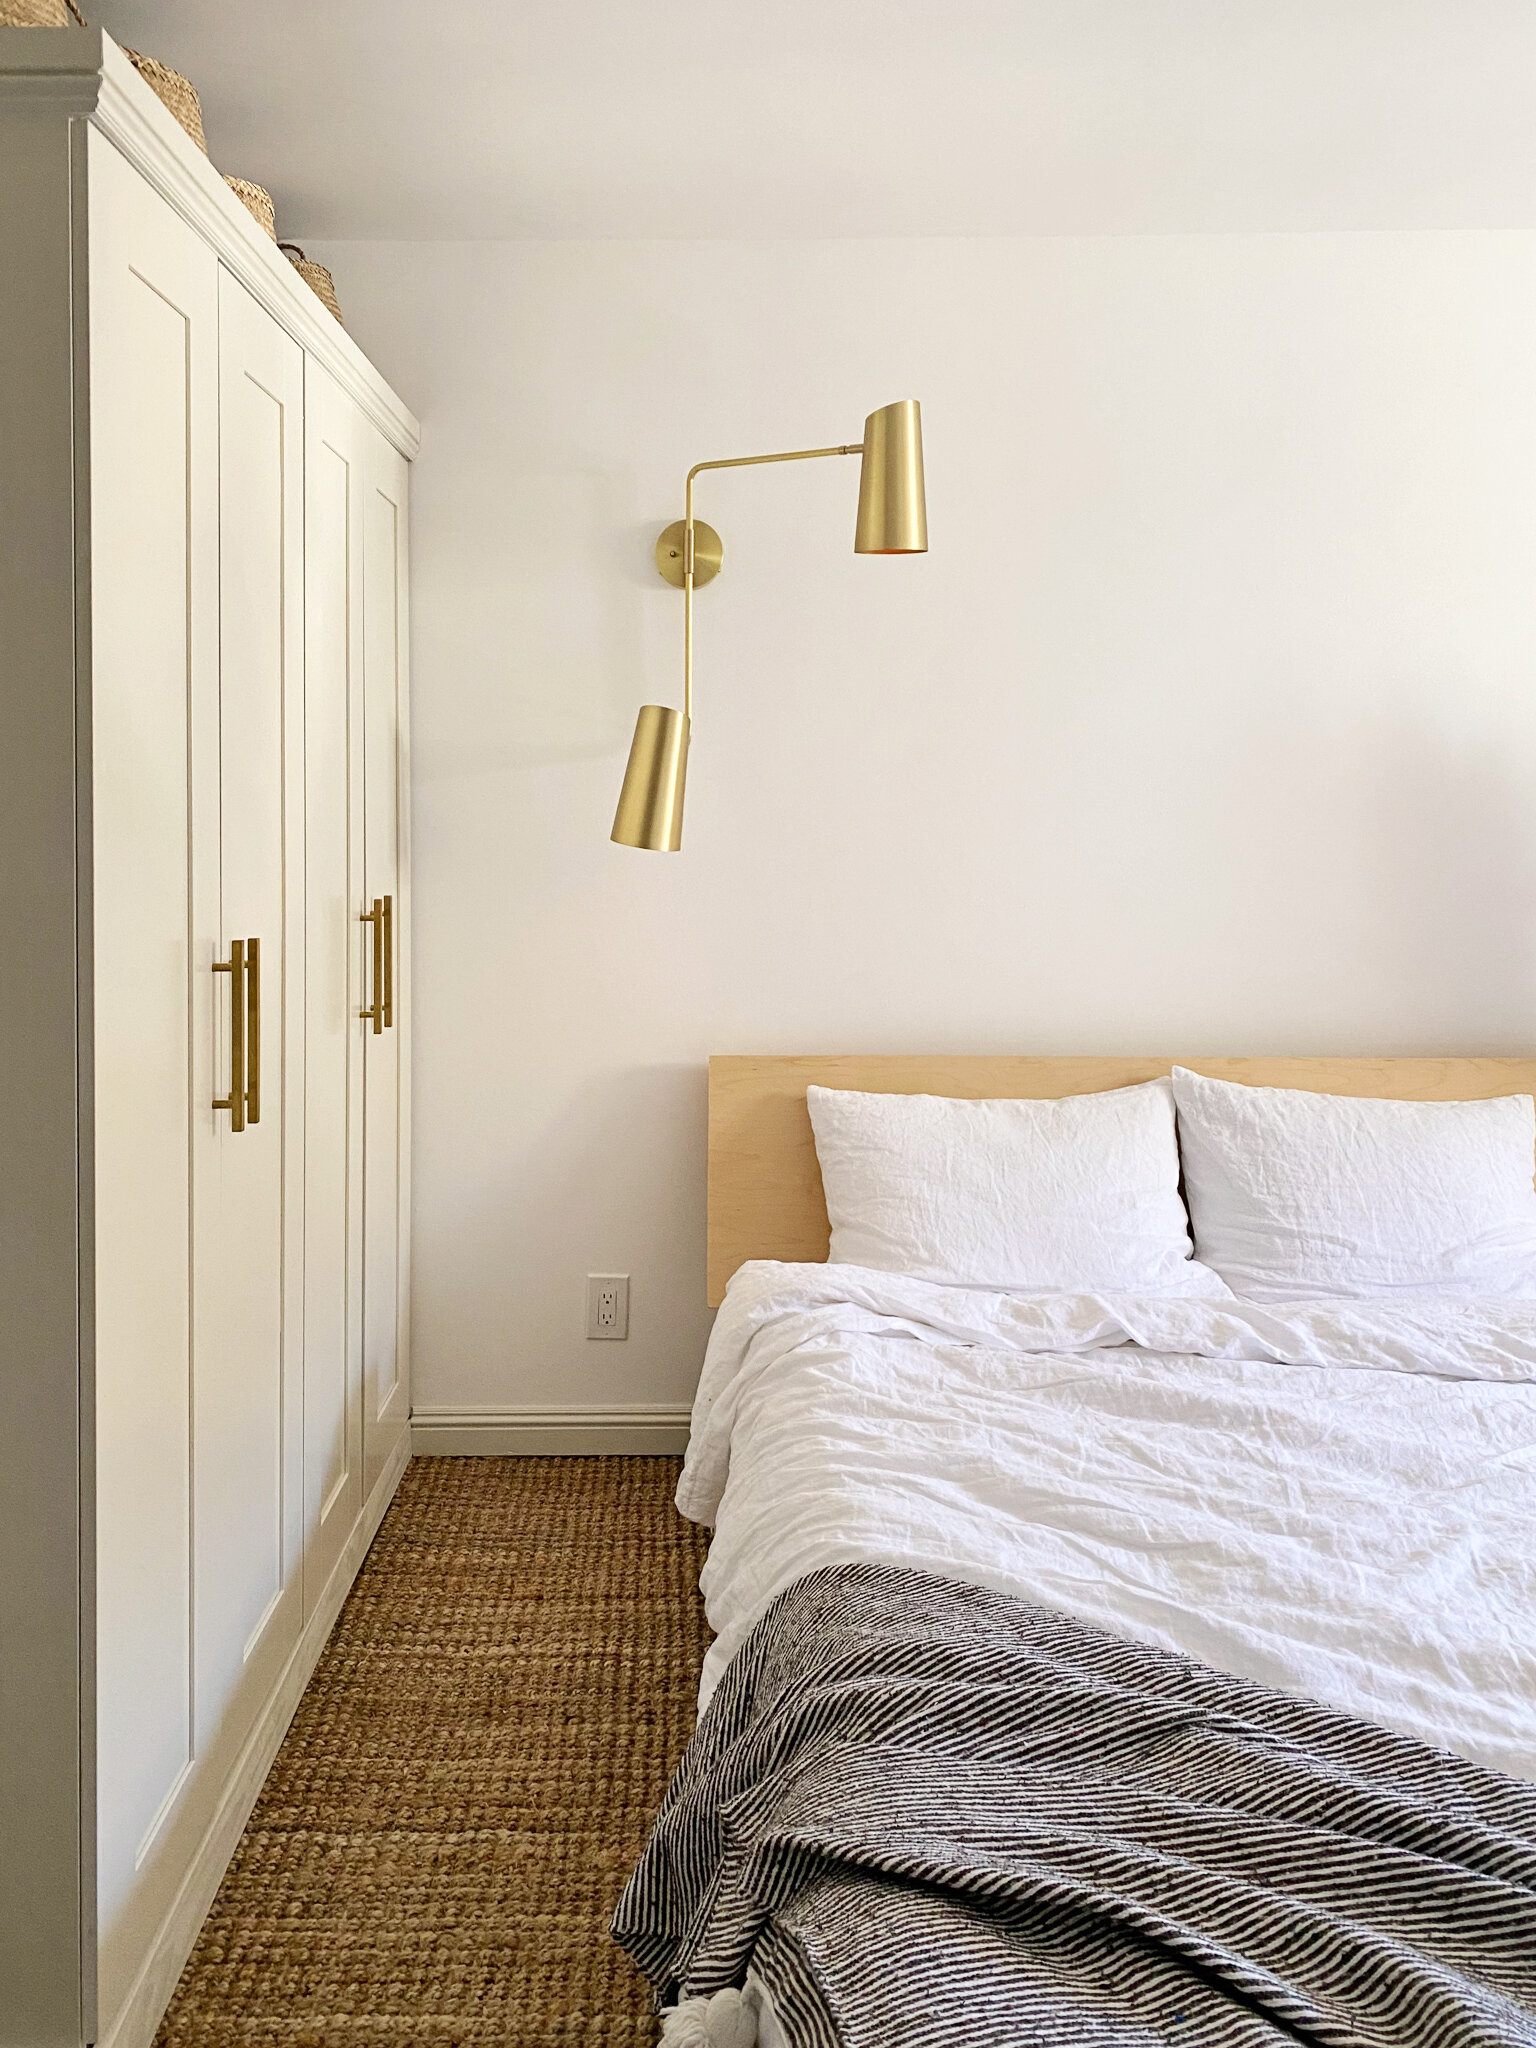  Instead of centering the bed on the wall between the sconces, we paired it with a light that could be extended over the bed and grouped the pair with the wardrobe to carve out a zone. 